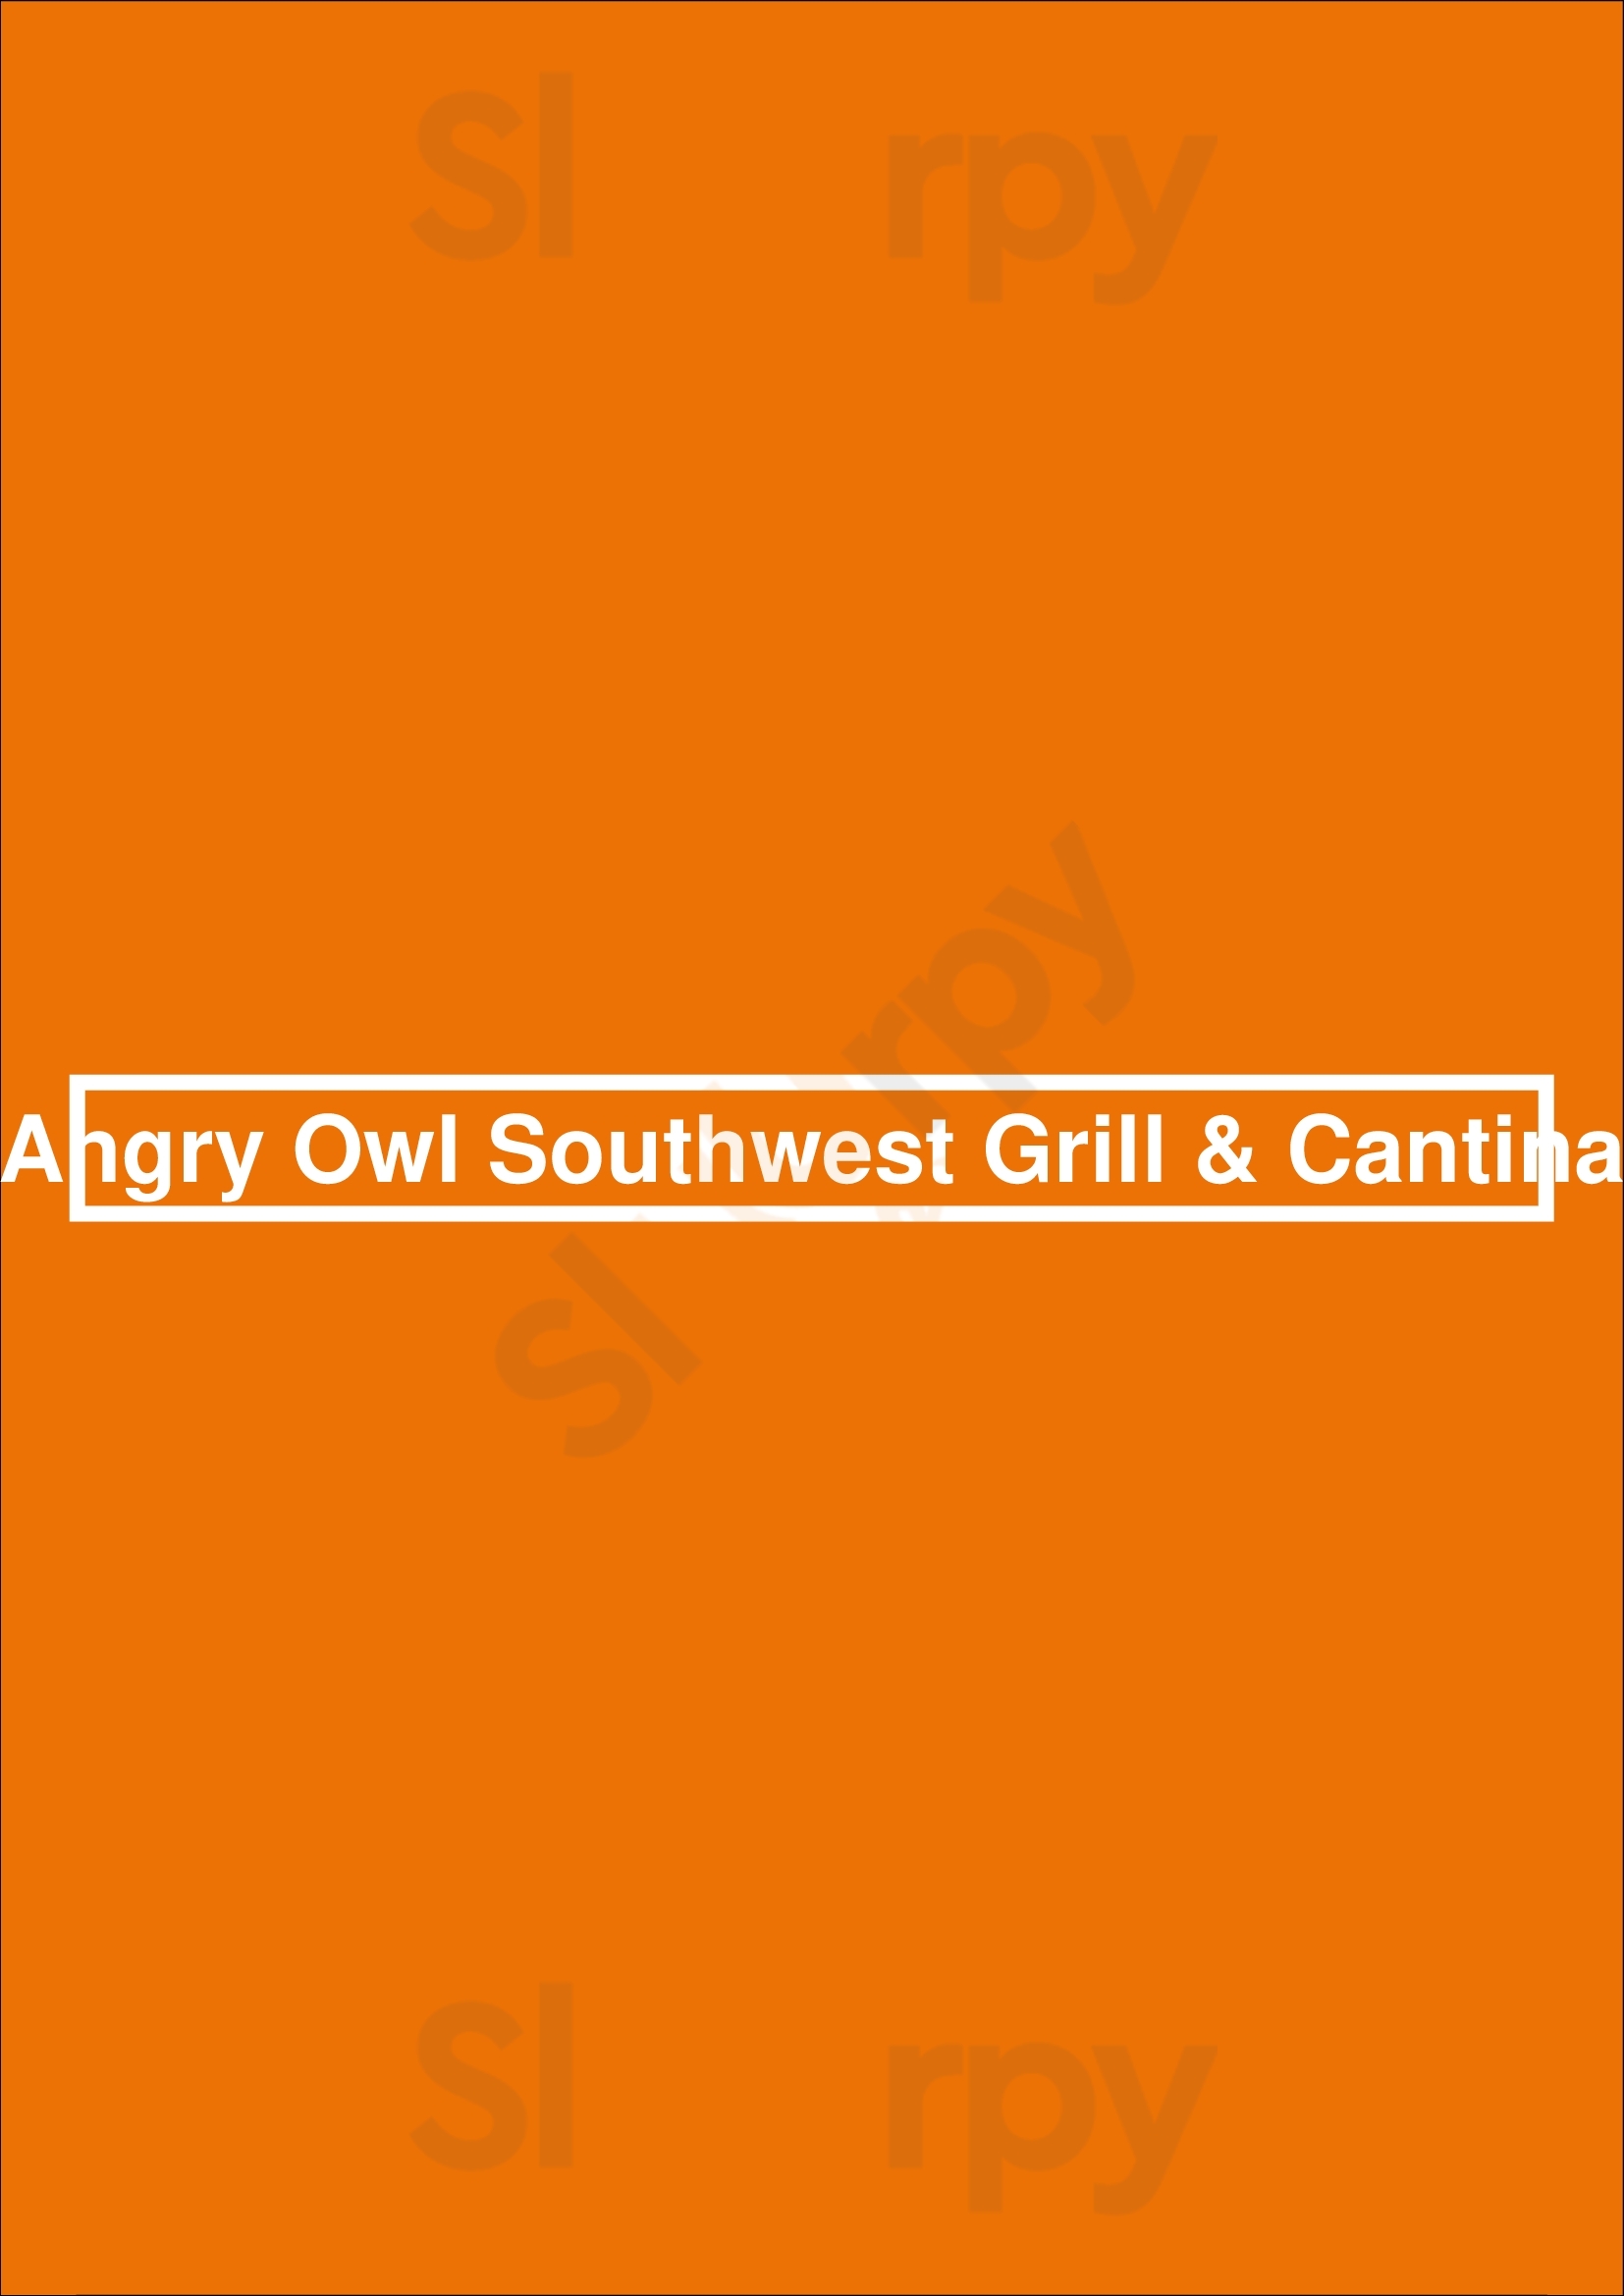 Angry Owl Southwest Grill & Cantina El Paso Menu - 1